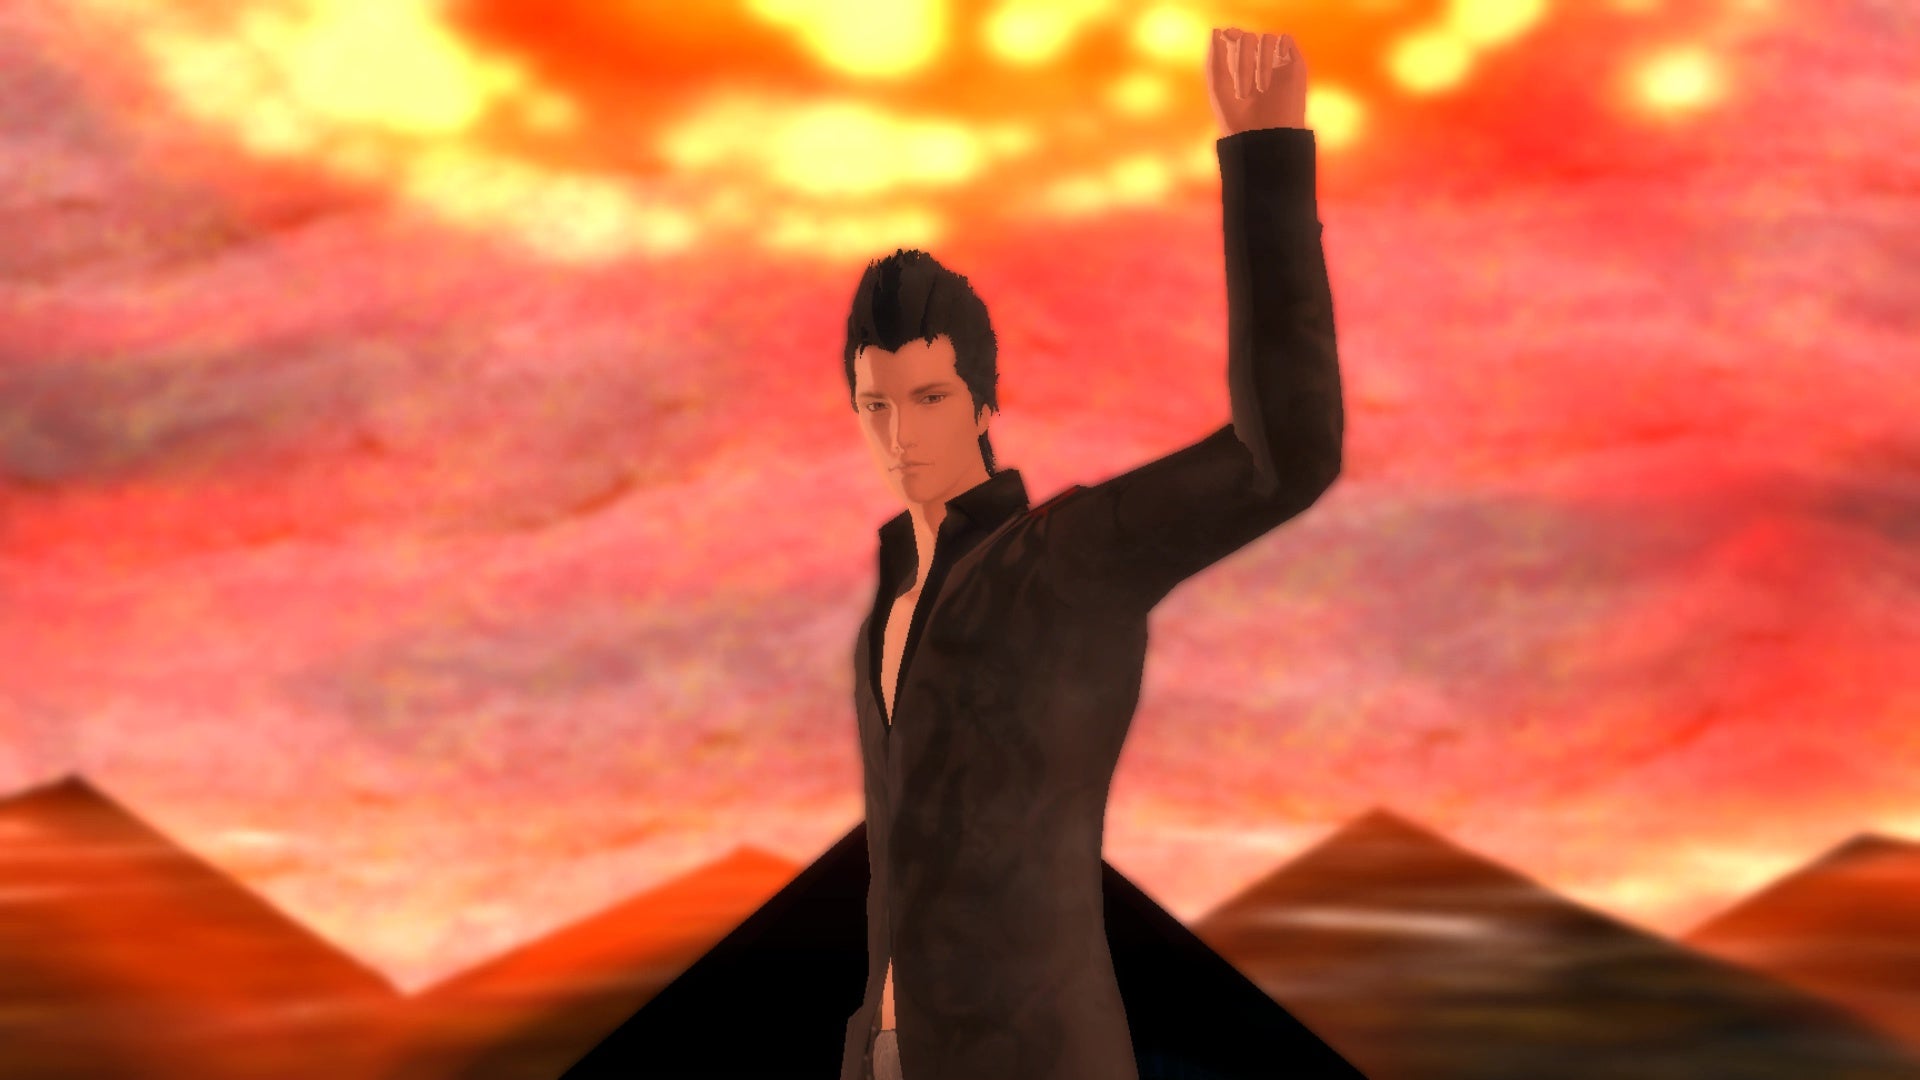 Lucifel points to the sky in El Shaddai.